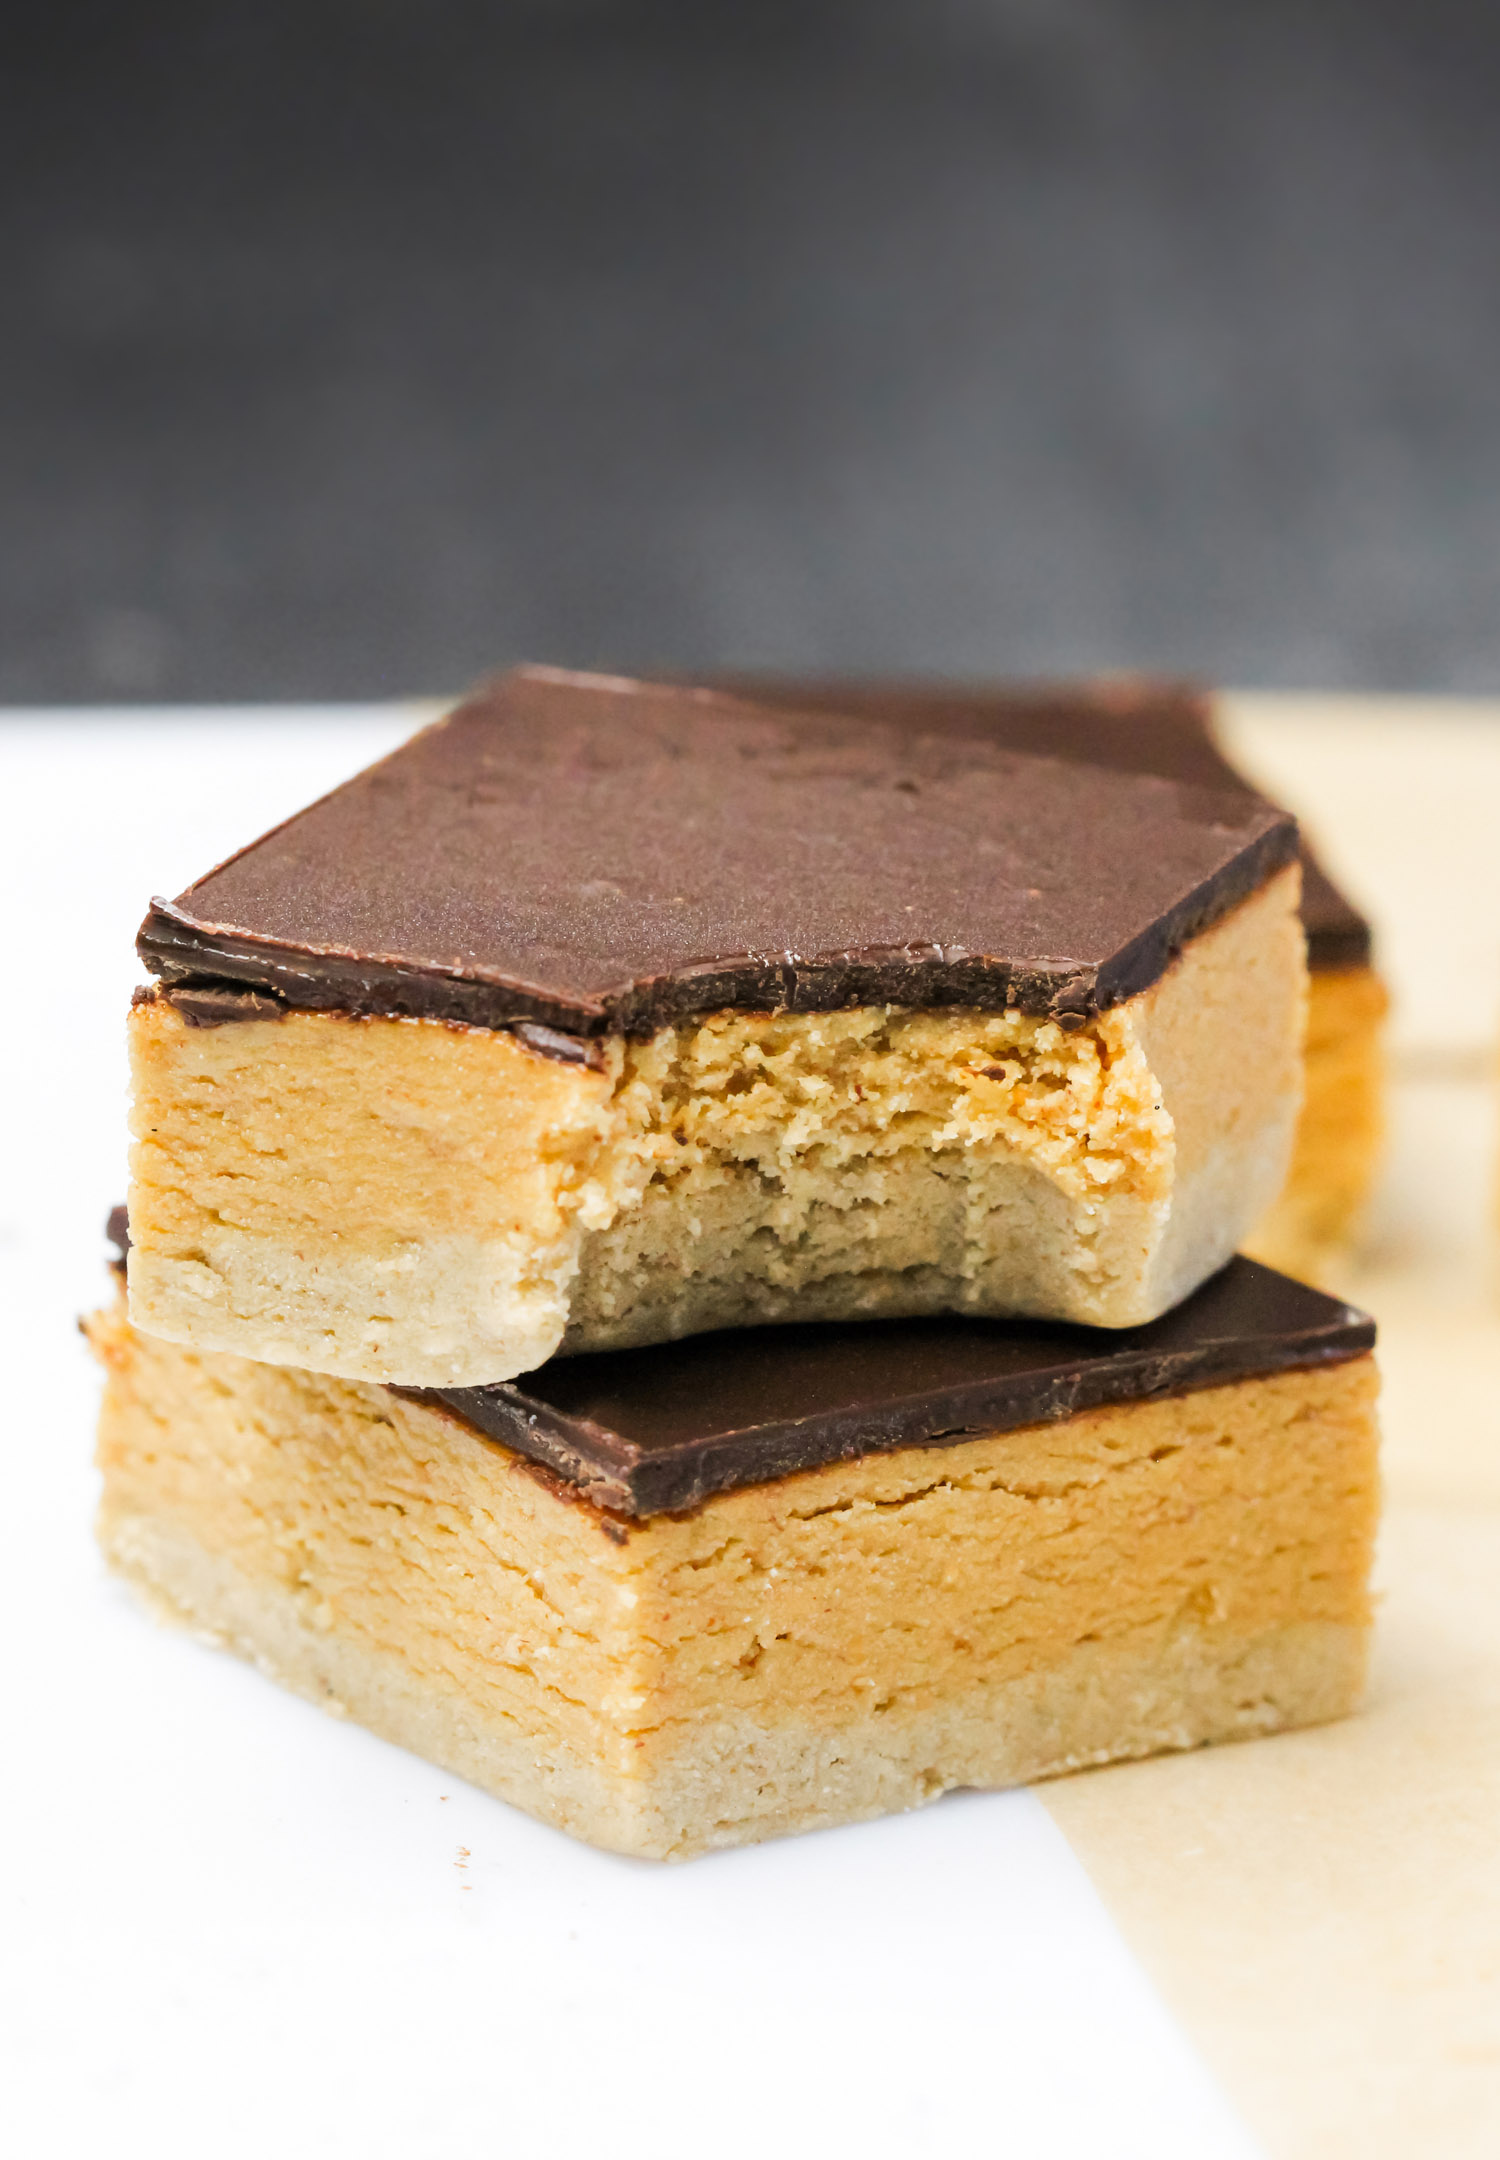 These no bake Healthy Peanut Butter Dark Chocolate Shortbread Bars are uber rich and decadent, it's hard to believe they're gluten free, refined sugar free, high protein, and super easy to make! Healthy Dessert Recipes at the Desserts With Benefits Blog (www.DessertsWithBenefits.com)